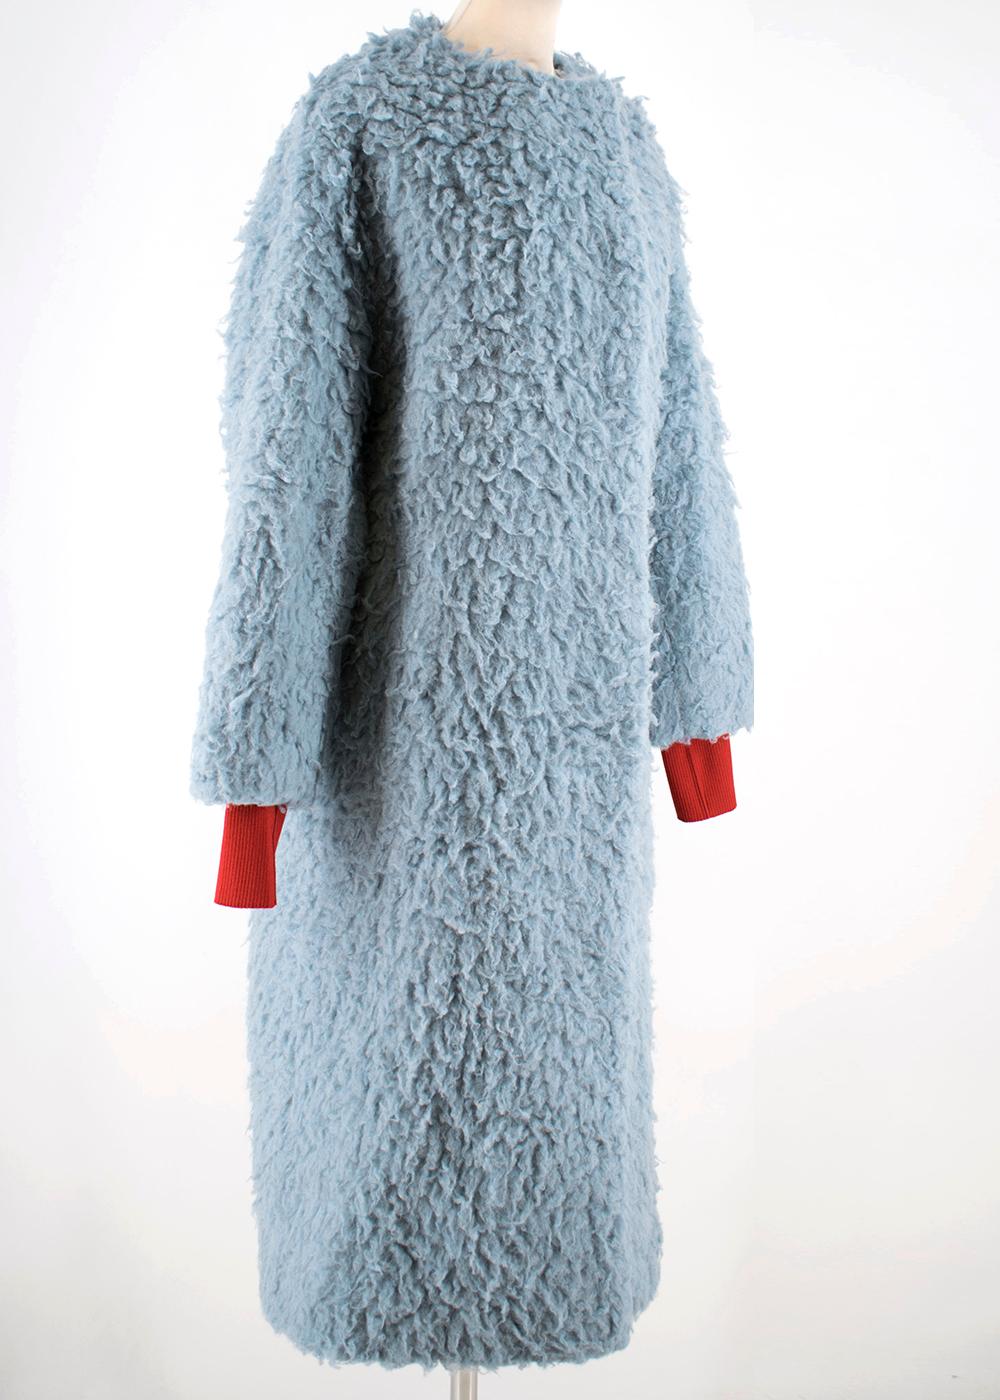 From the Fall 2018 Collection. Pale blue Roksanda Edine camel wool coat with dual slit pockets and hook closures at front, featuring an accented red ribbed cuff on the sleeves. RRP £1500

Fabric: 81% Camel Wool, 19% Silk; Lining 100% Silk 

Please